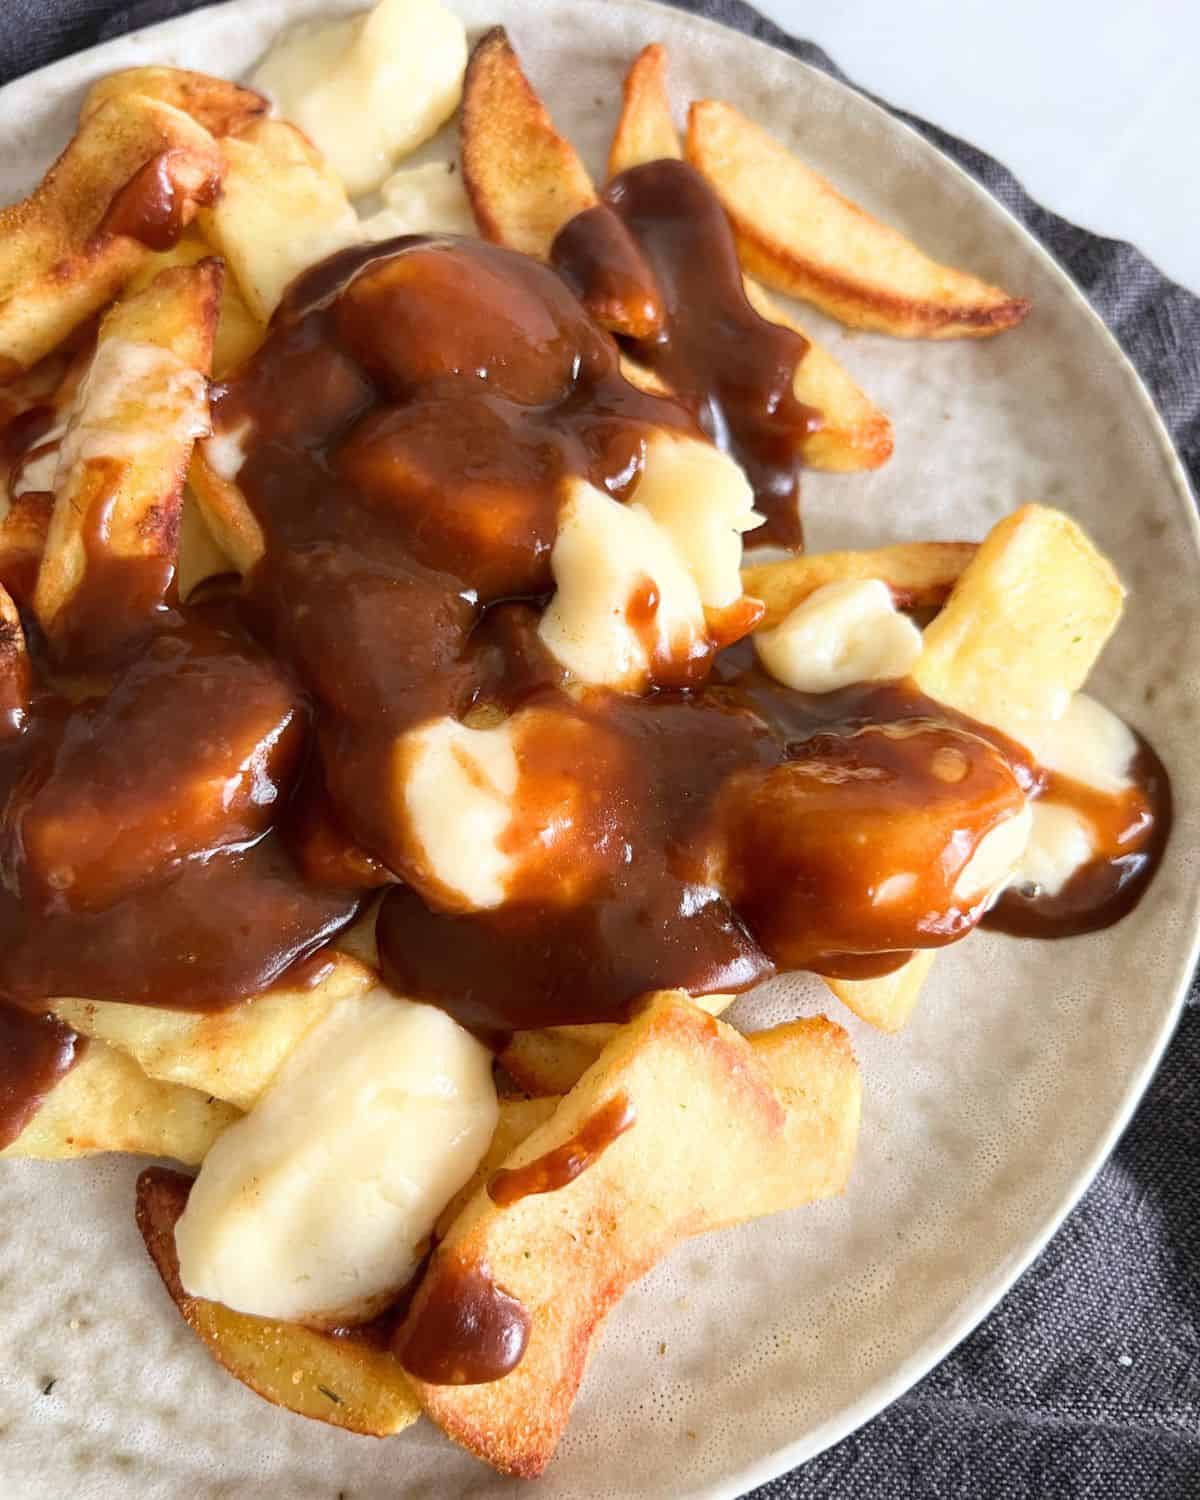 Gravy and cheese curds topped on fries. 